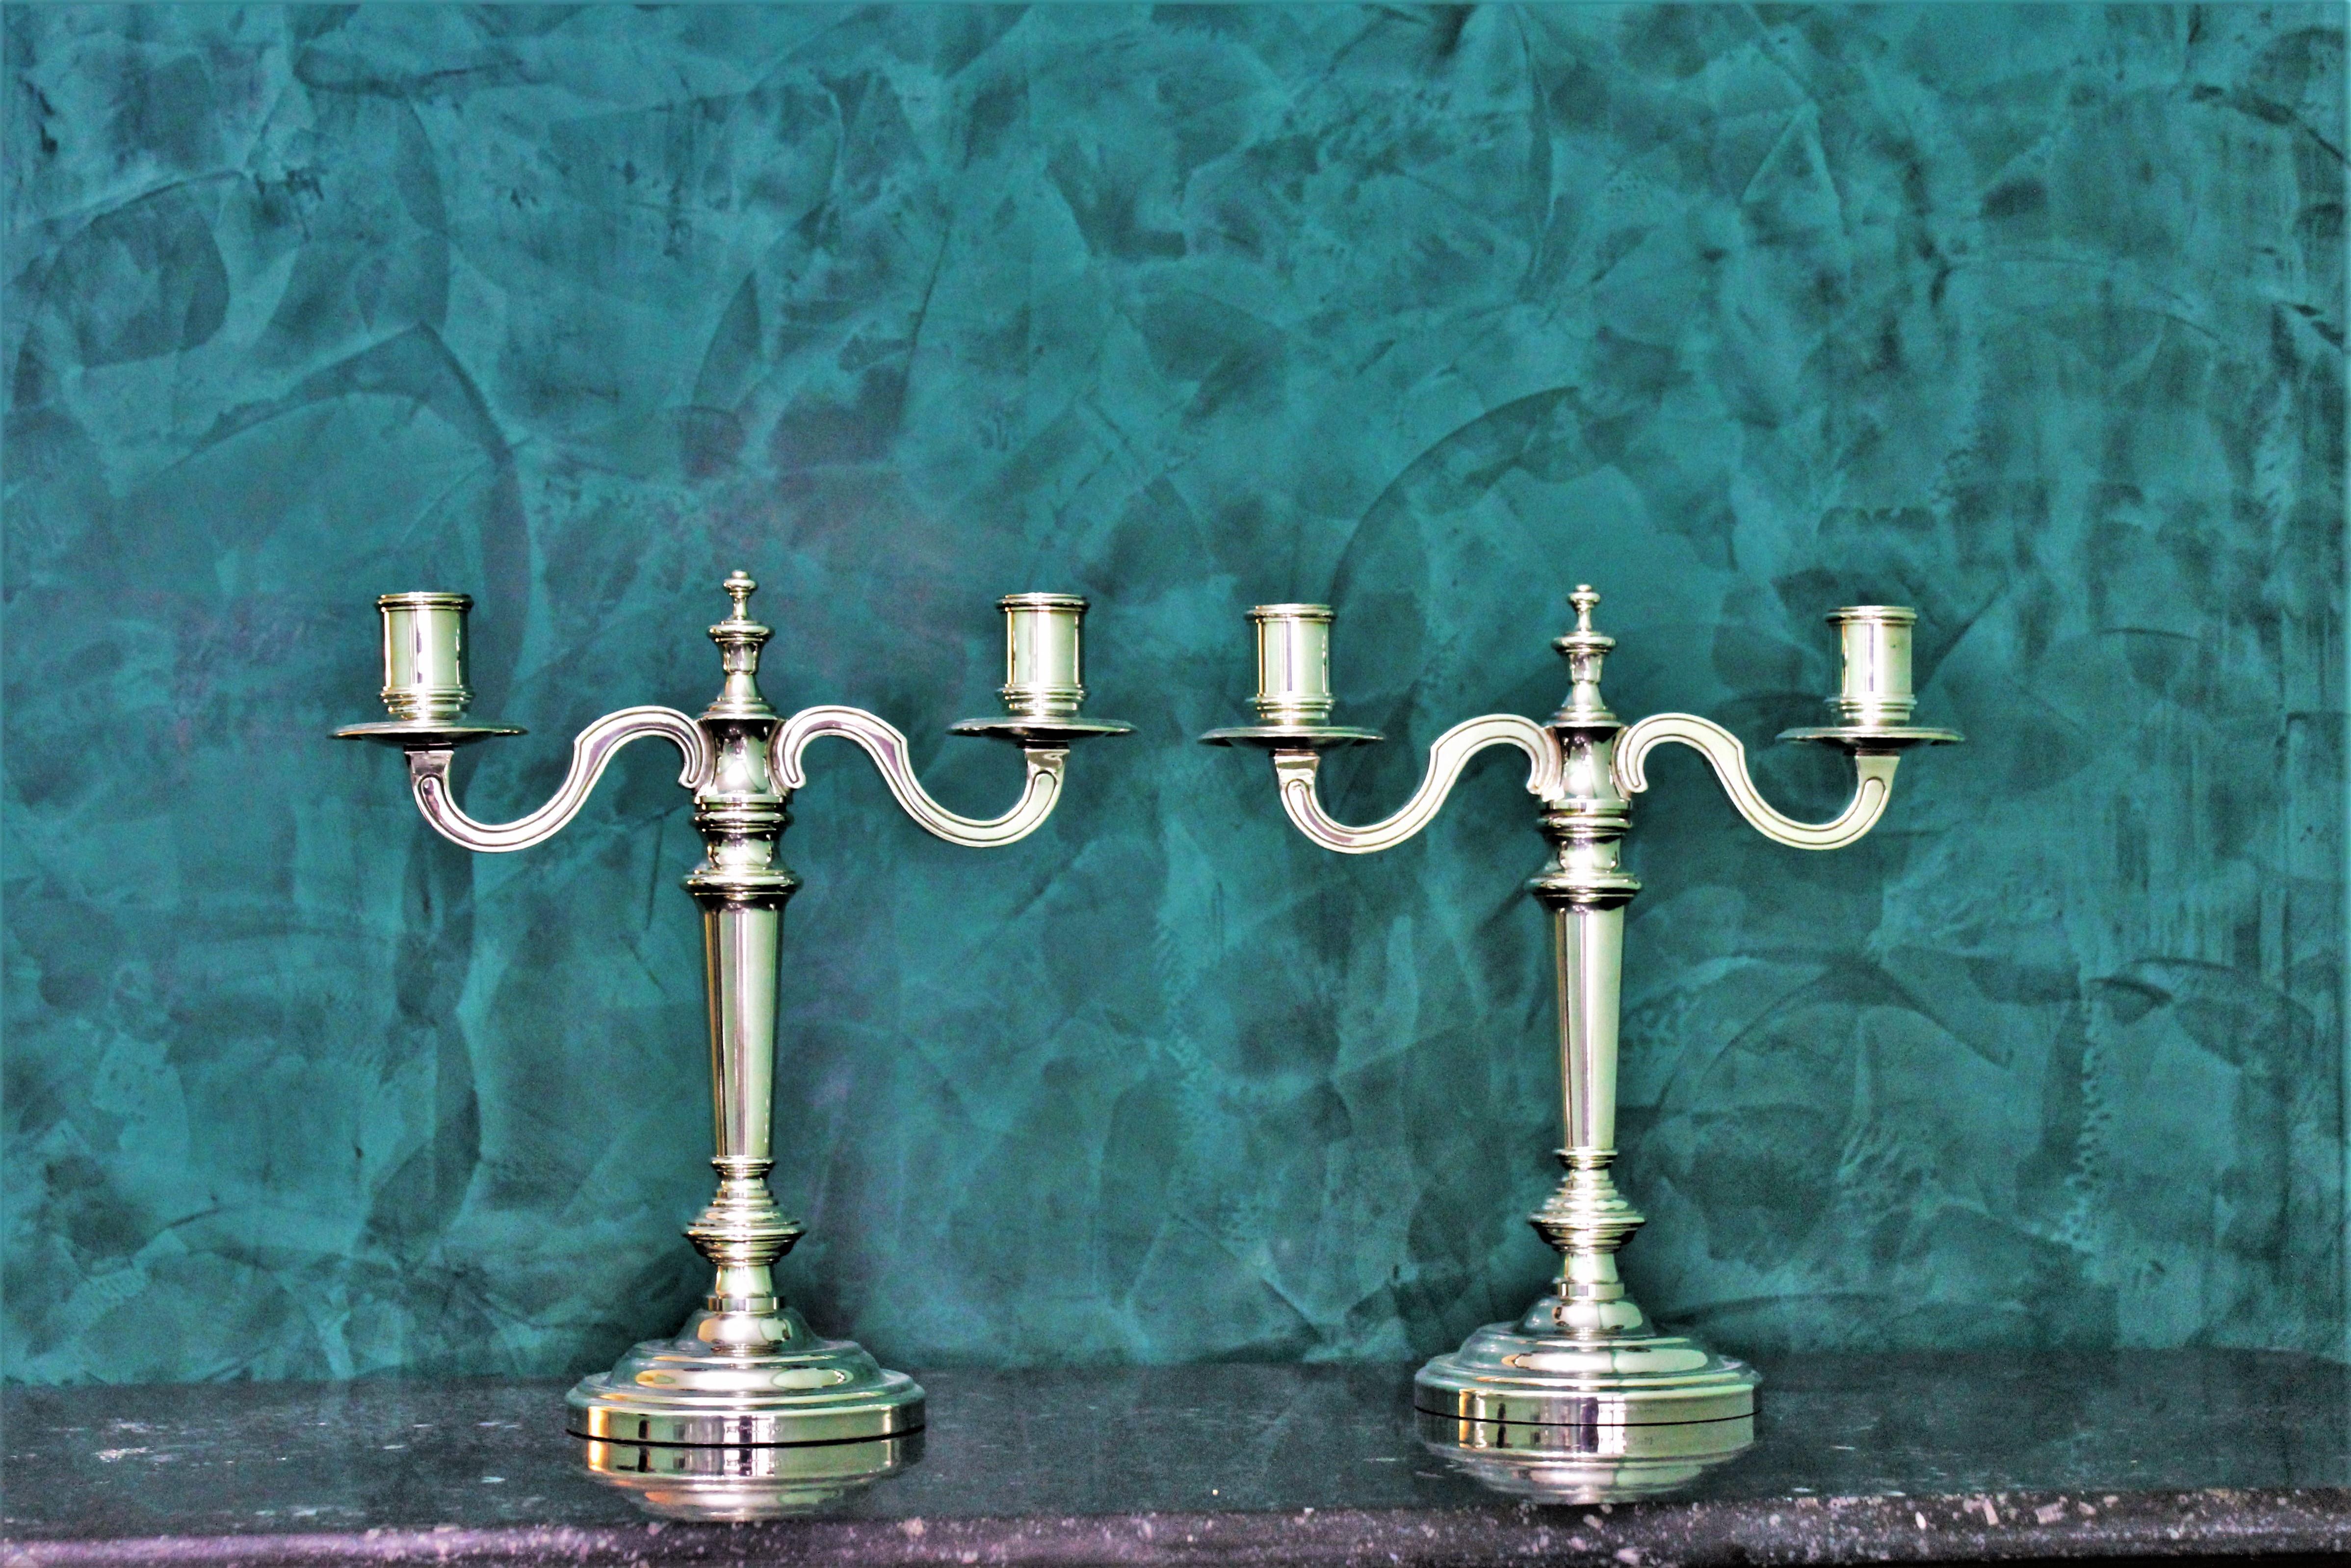 Pair of Christofle candlesticks, realized by the French Maison located in Paris with the typical Christofle alloy.
Beautiful, elegant and in very good condition.
Dimensions: Height 26.5 cm, width 25.5 cm, depth 10.5 cm, weight 2638 gr.